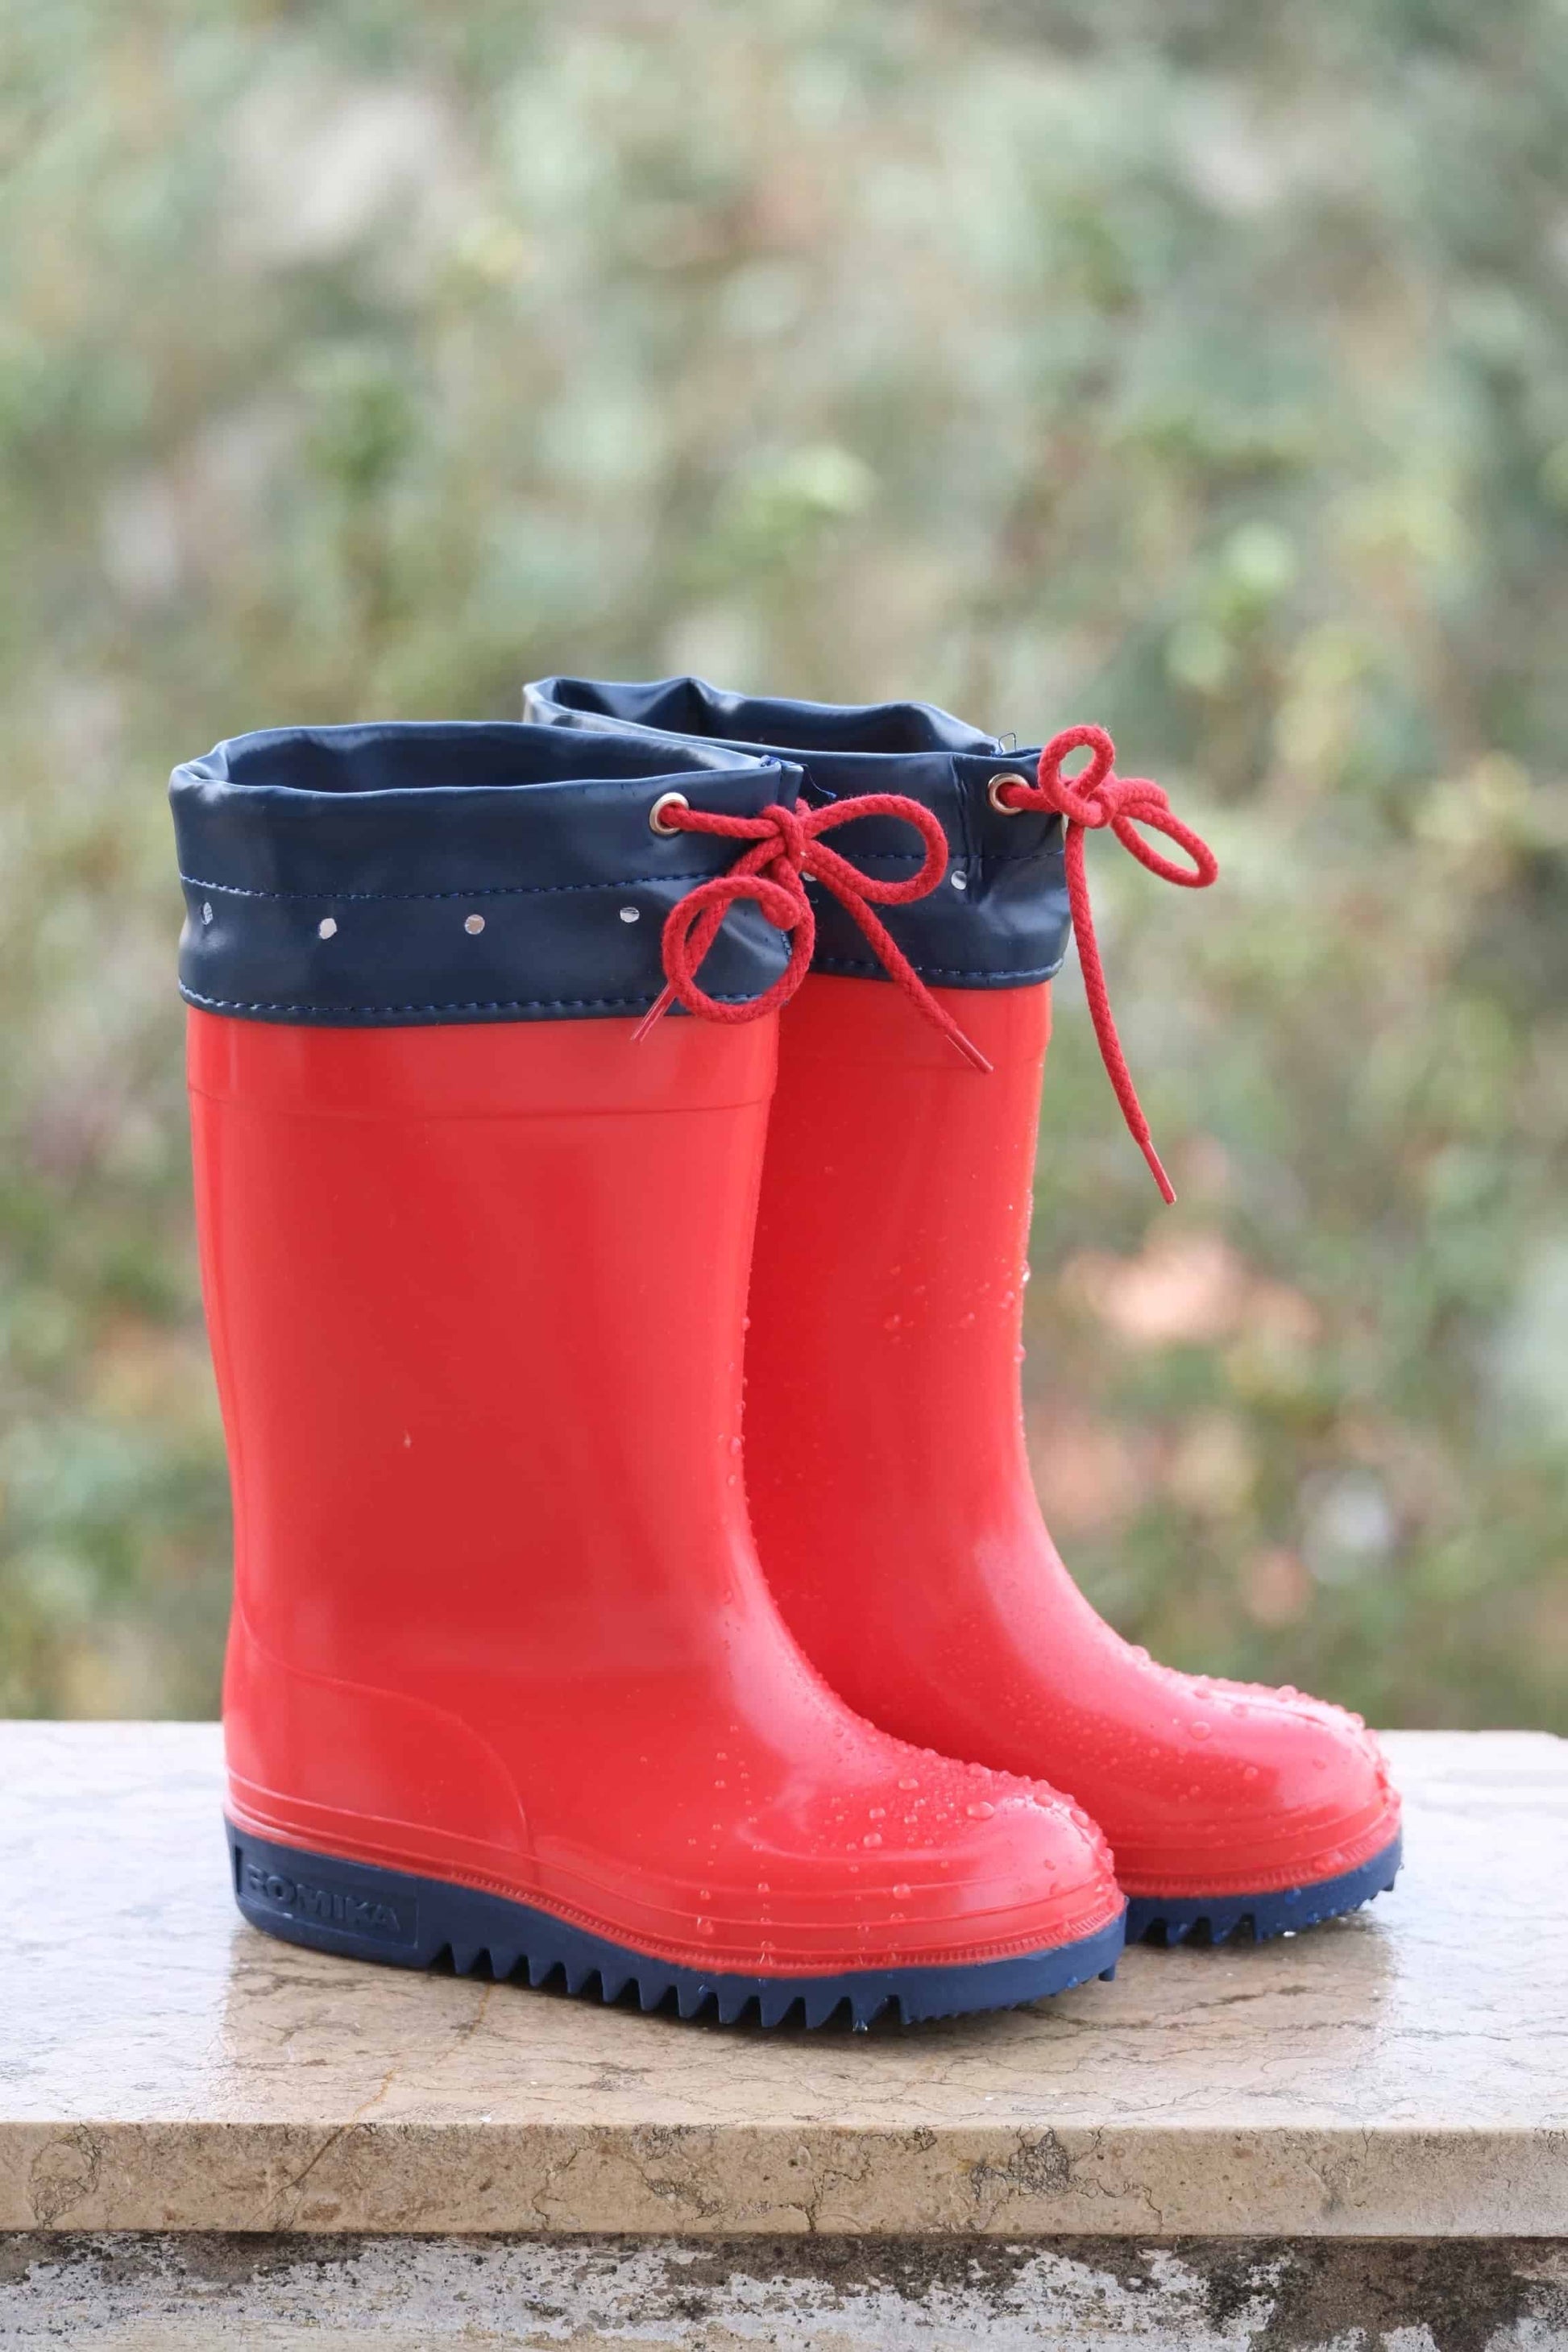 Red and navy ROMIKA Bobby Rain Boots on a ledge with raindrops on the boots